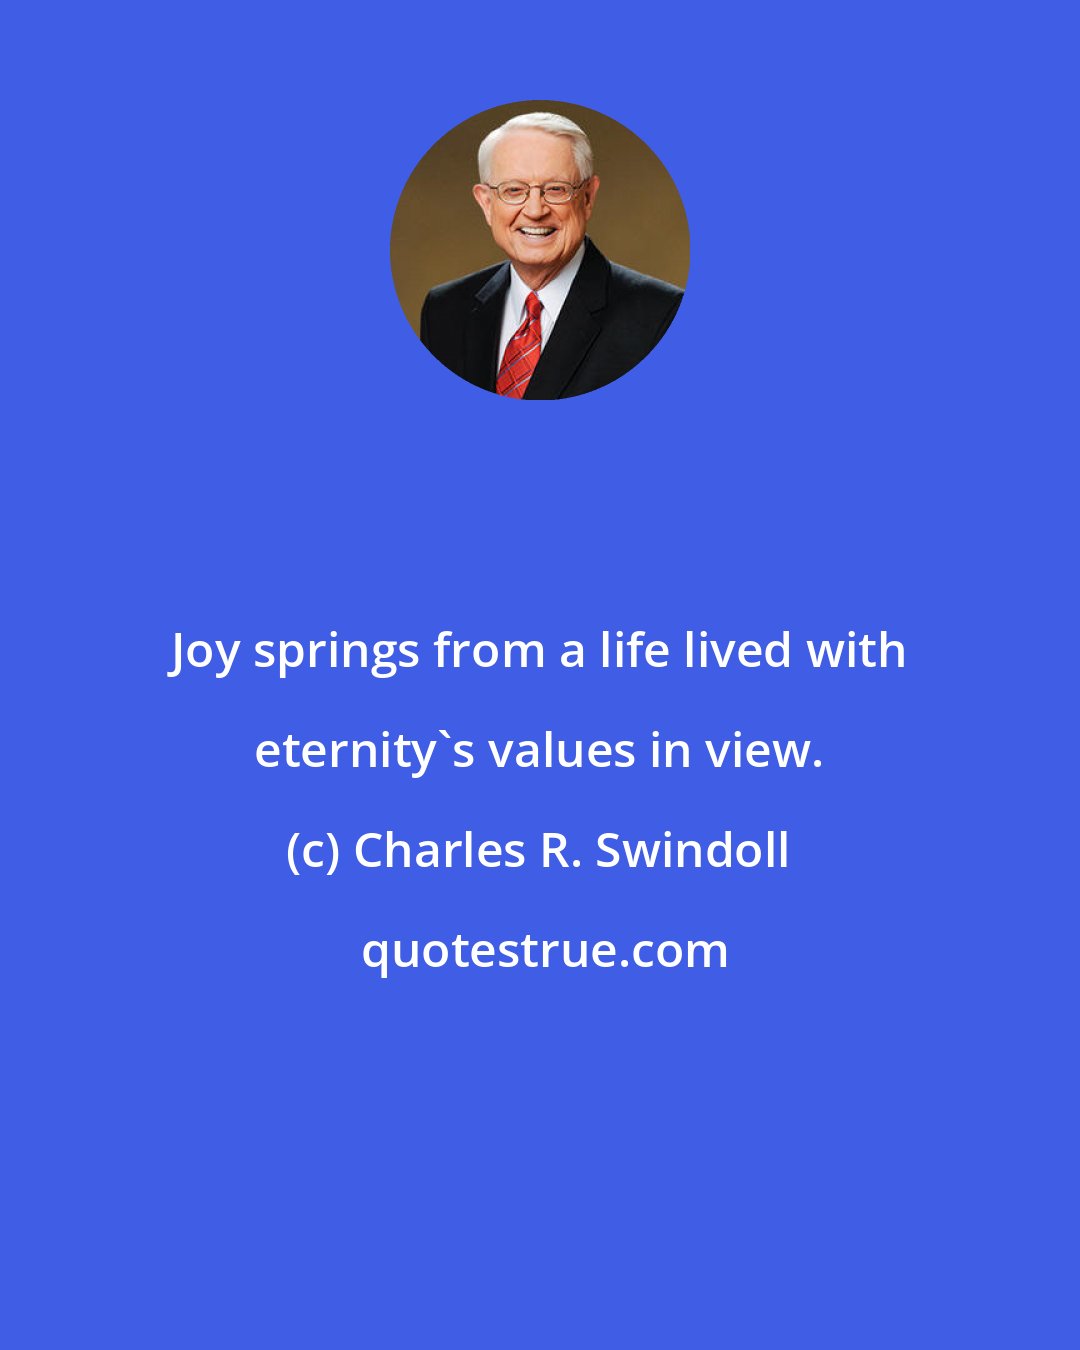 Charles R. Swindoll: Joy springs from a life lived with eternity's values in view.